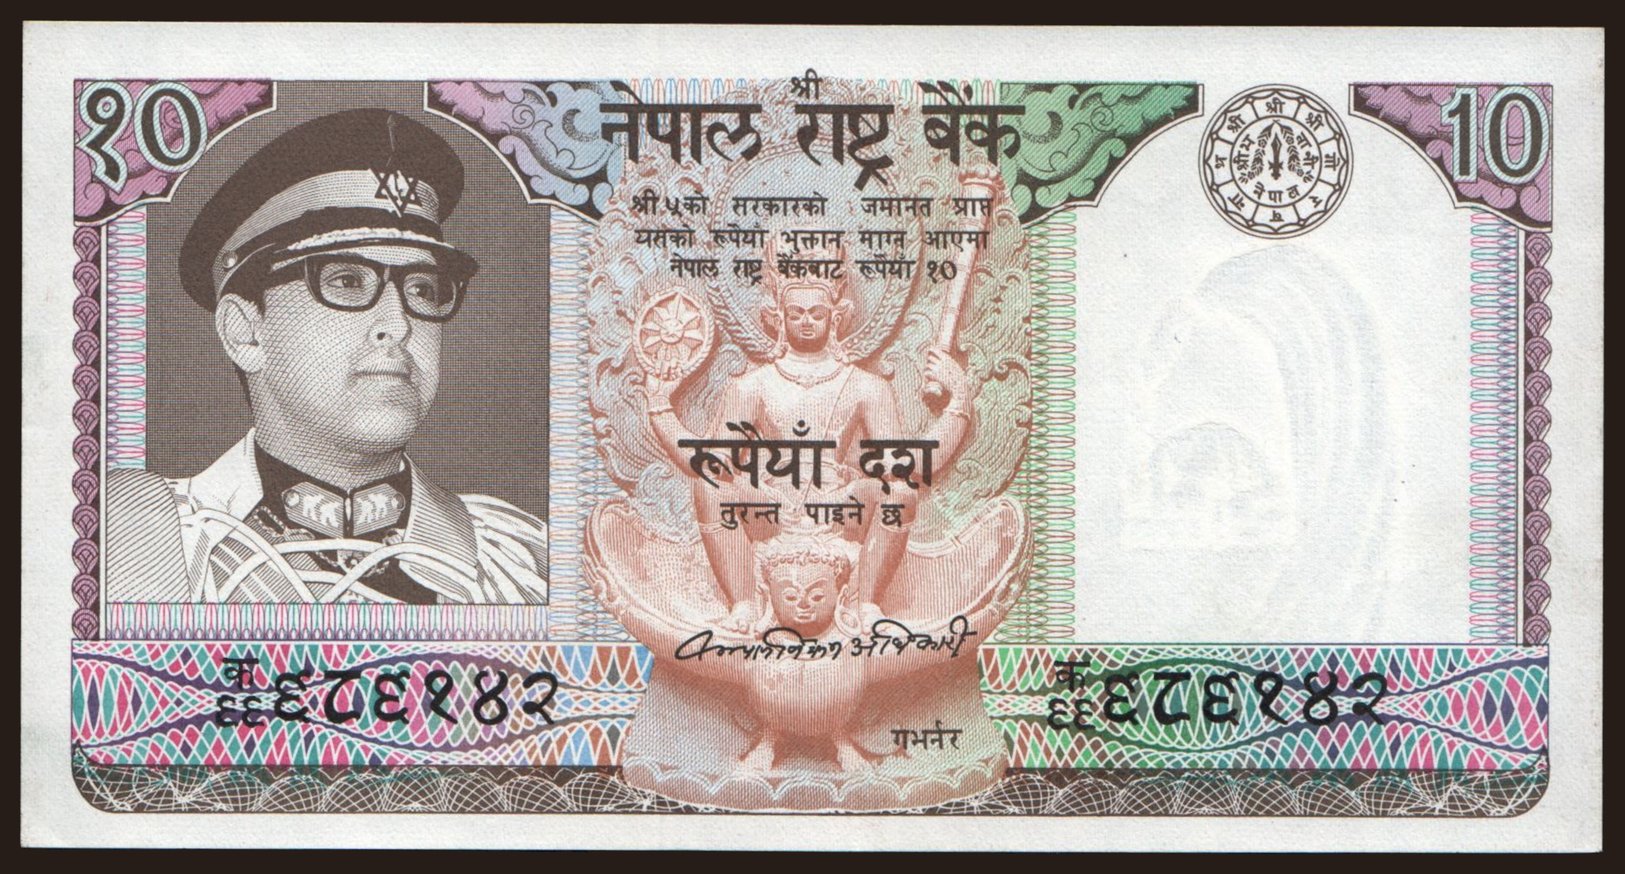 10 rupees, 1974